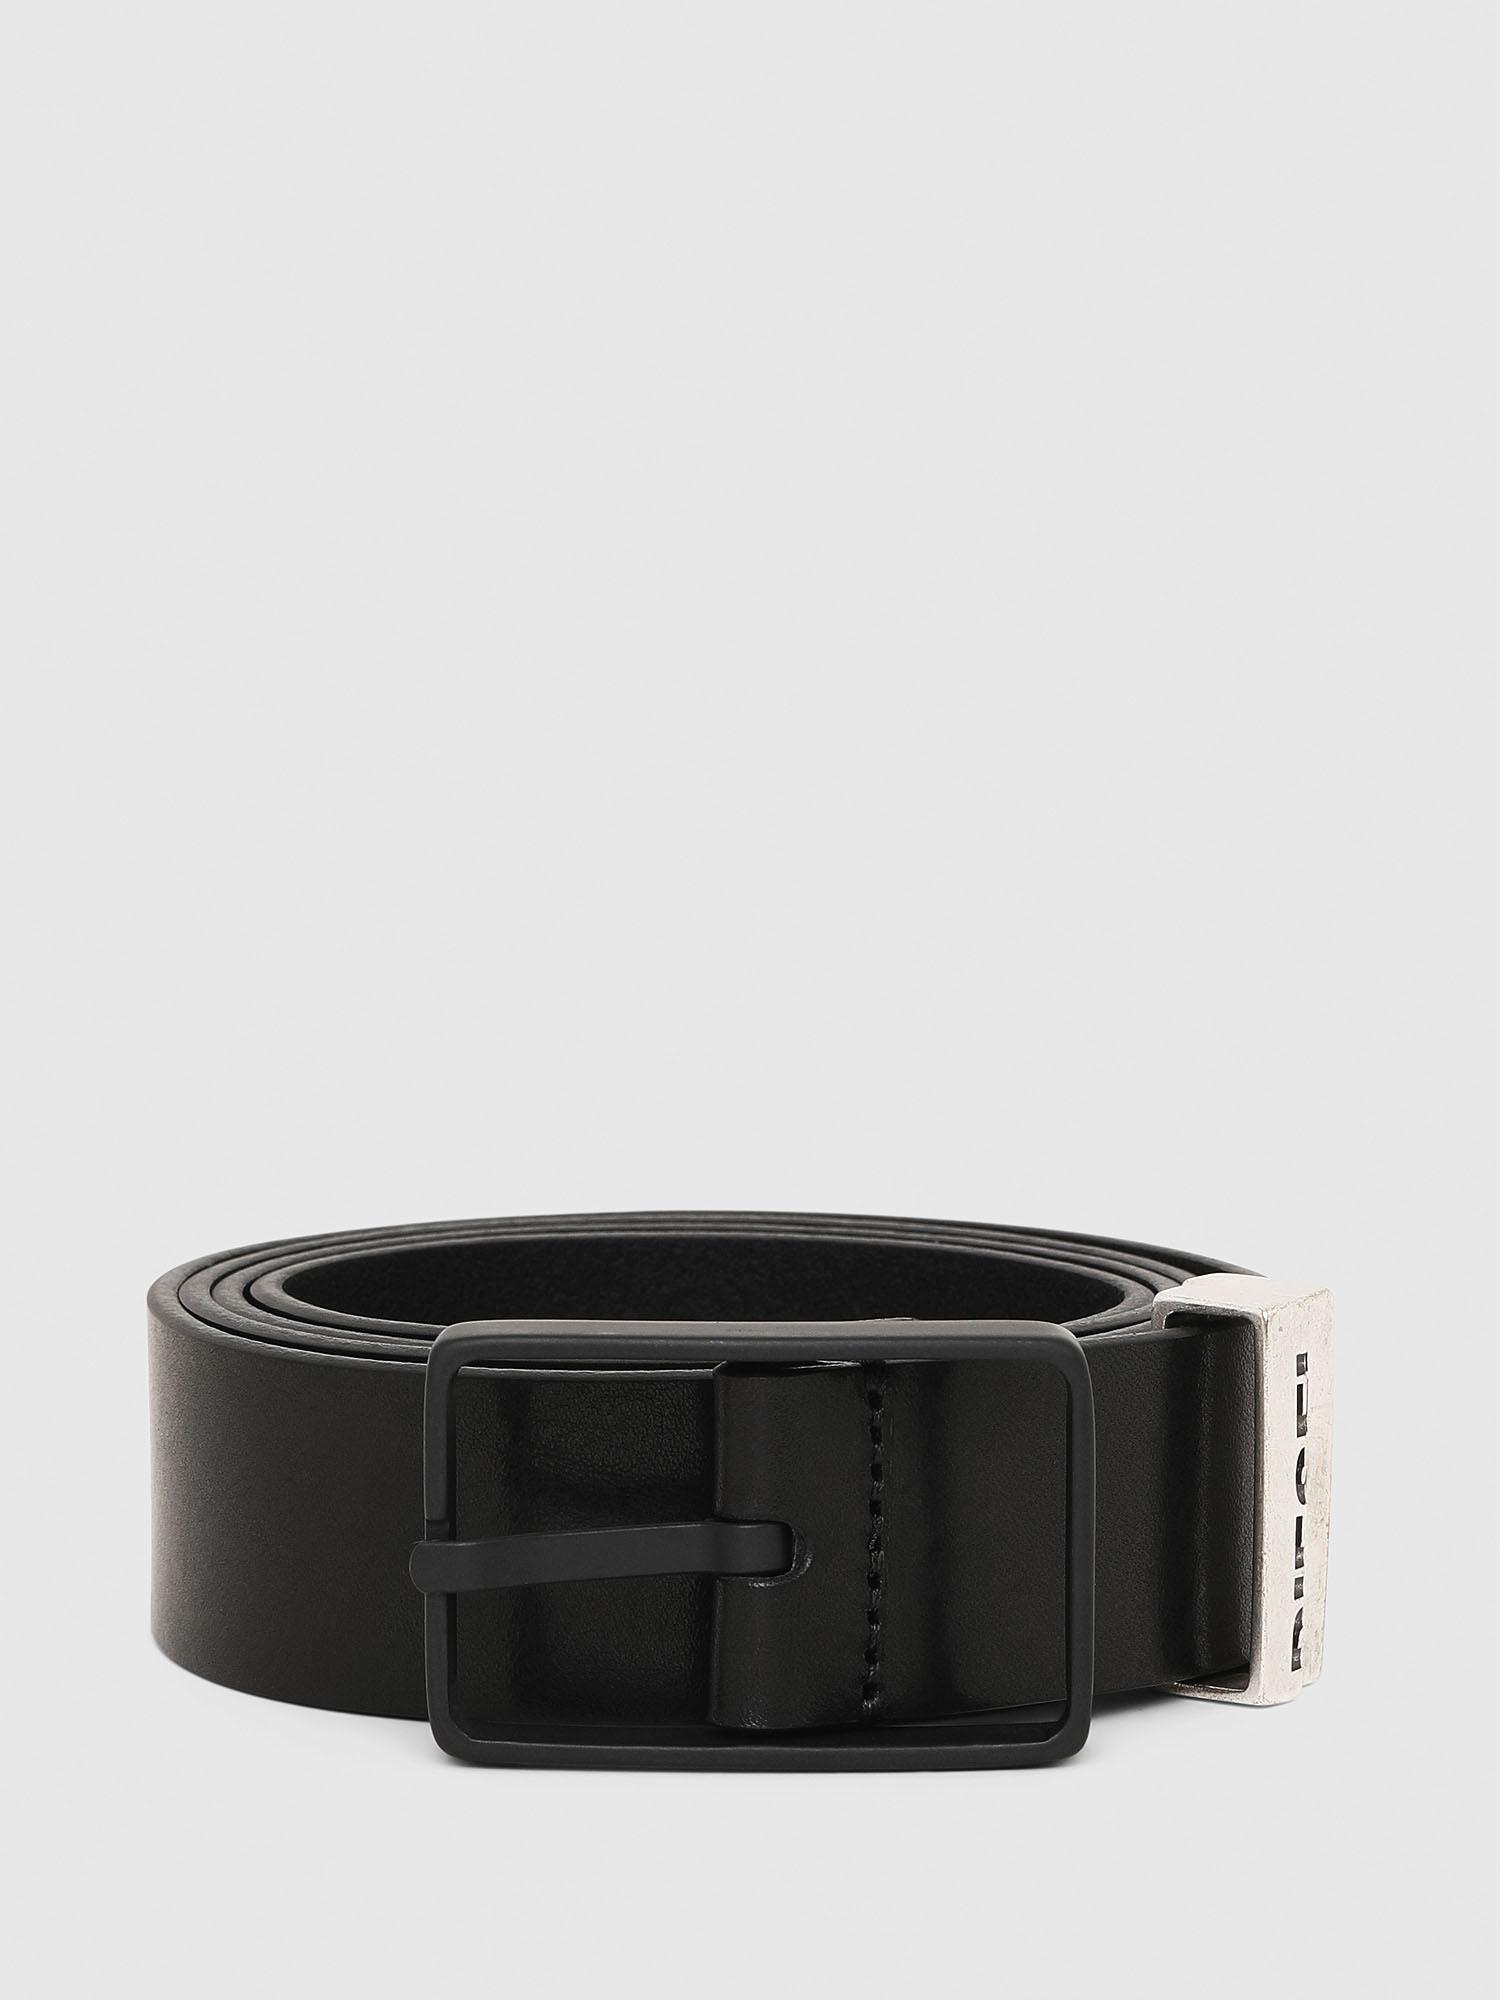 DIESEL Leather Belt With Pin Buckle in Black for Men - Lyst